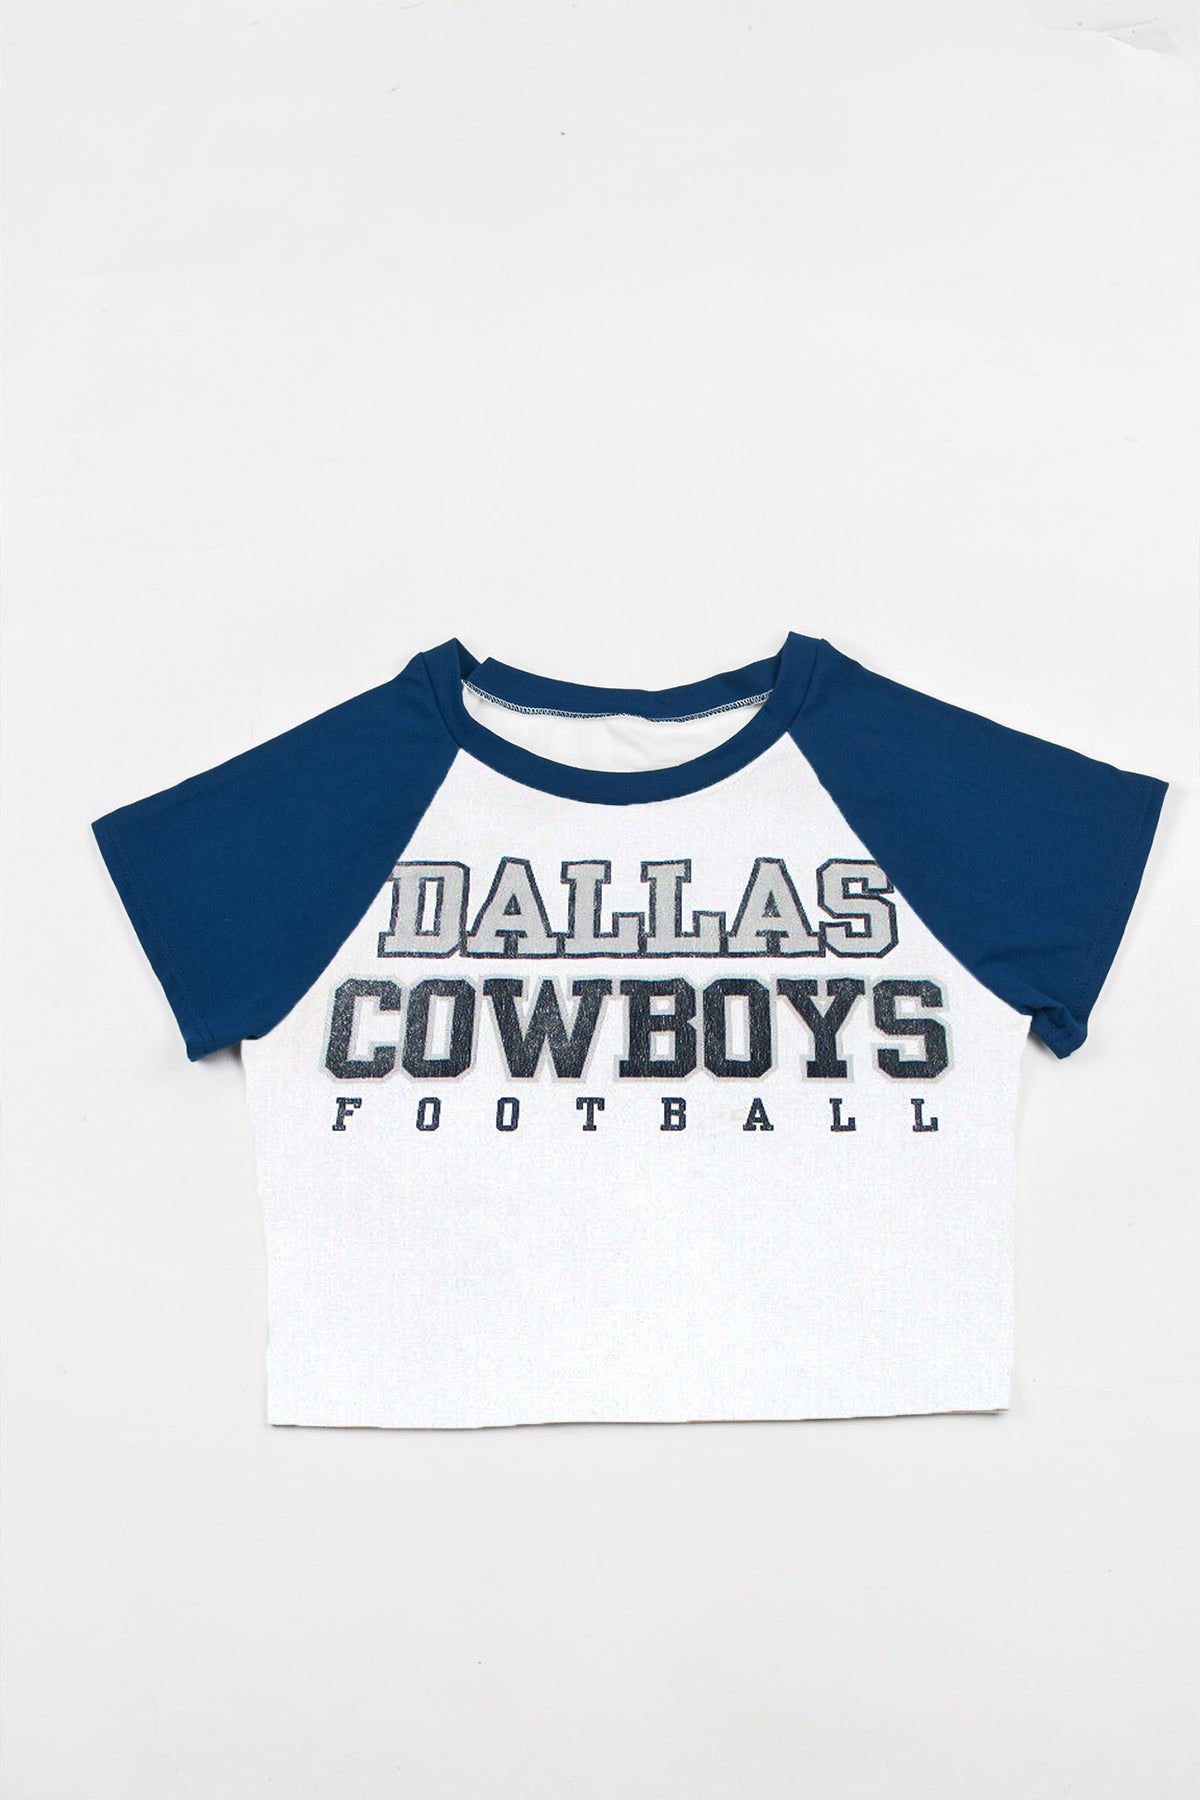 Upcycled Cowboys Baby Tee *MADE TO ORDER*